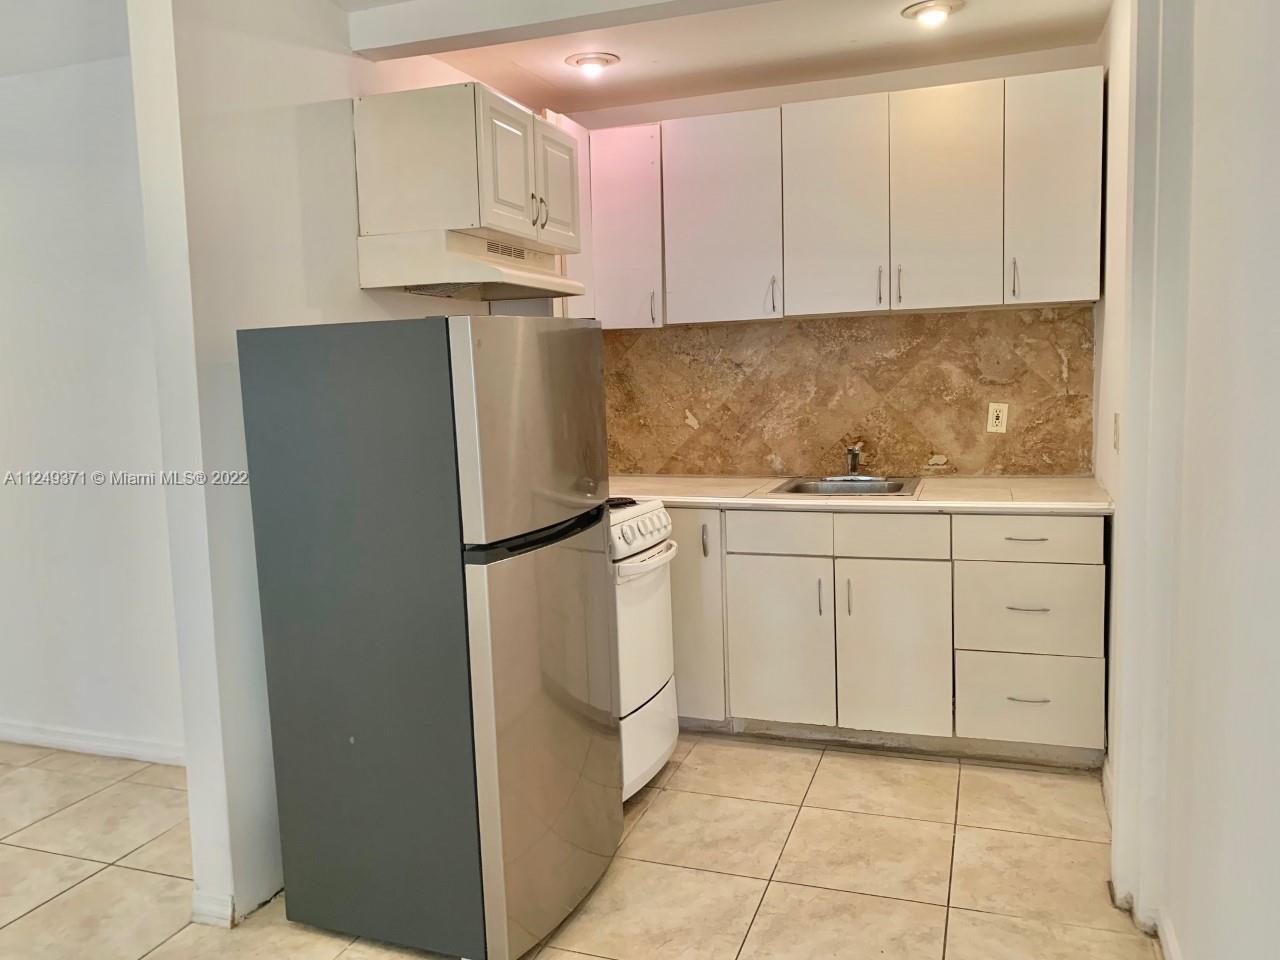 a kitchen with white cabinets and refrigerator